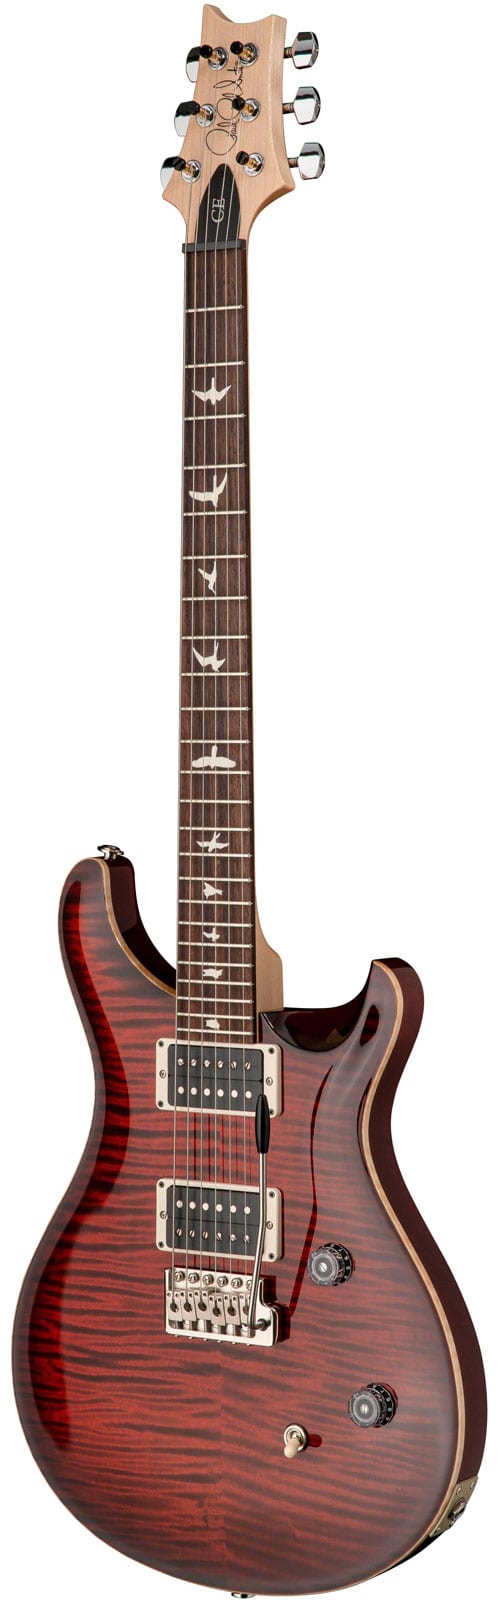 PRS - PAUL REED SMITH CE24 FIRE RED BURST